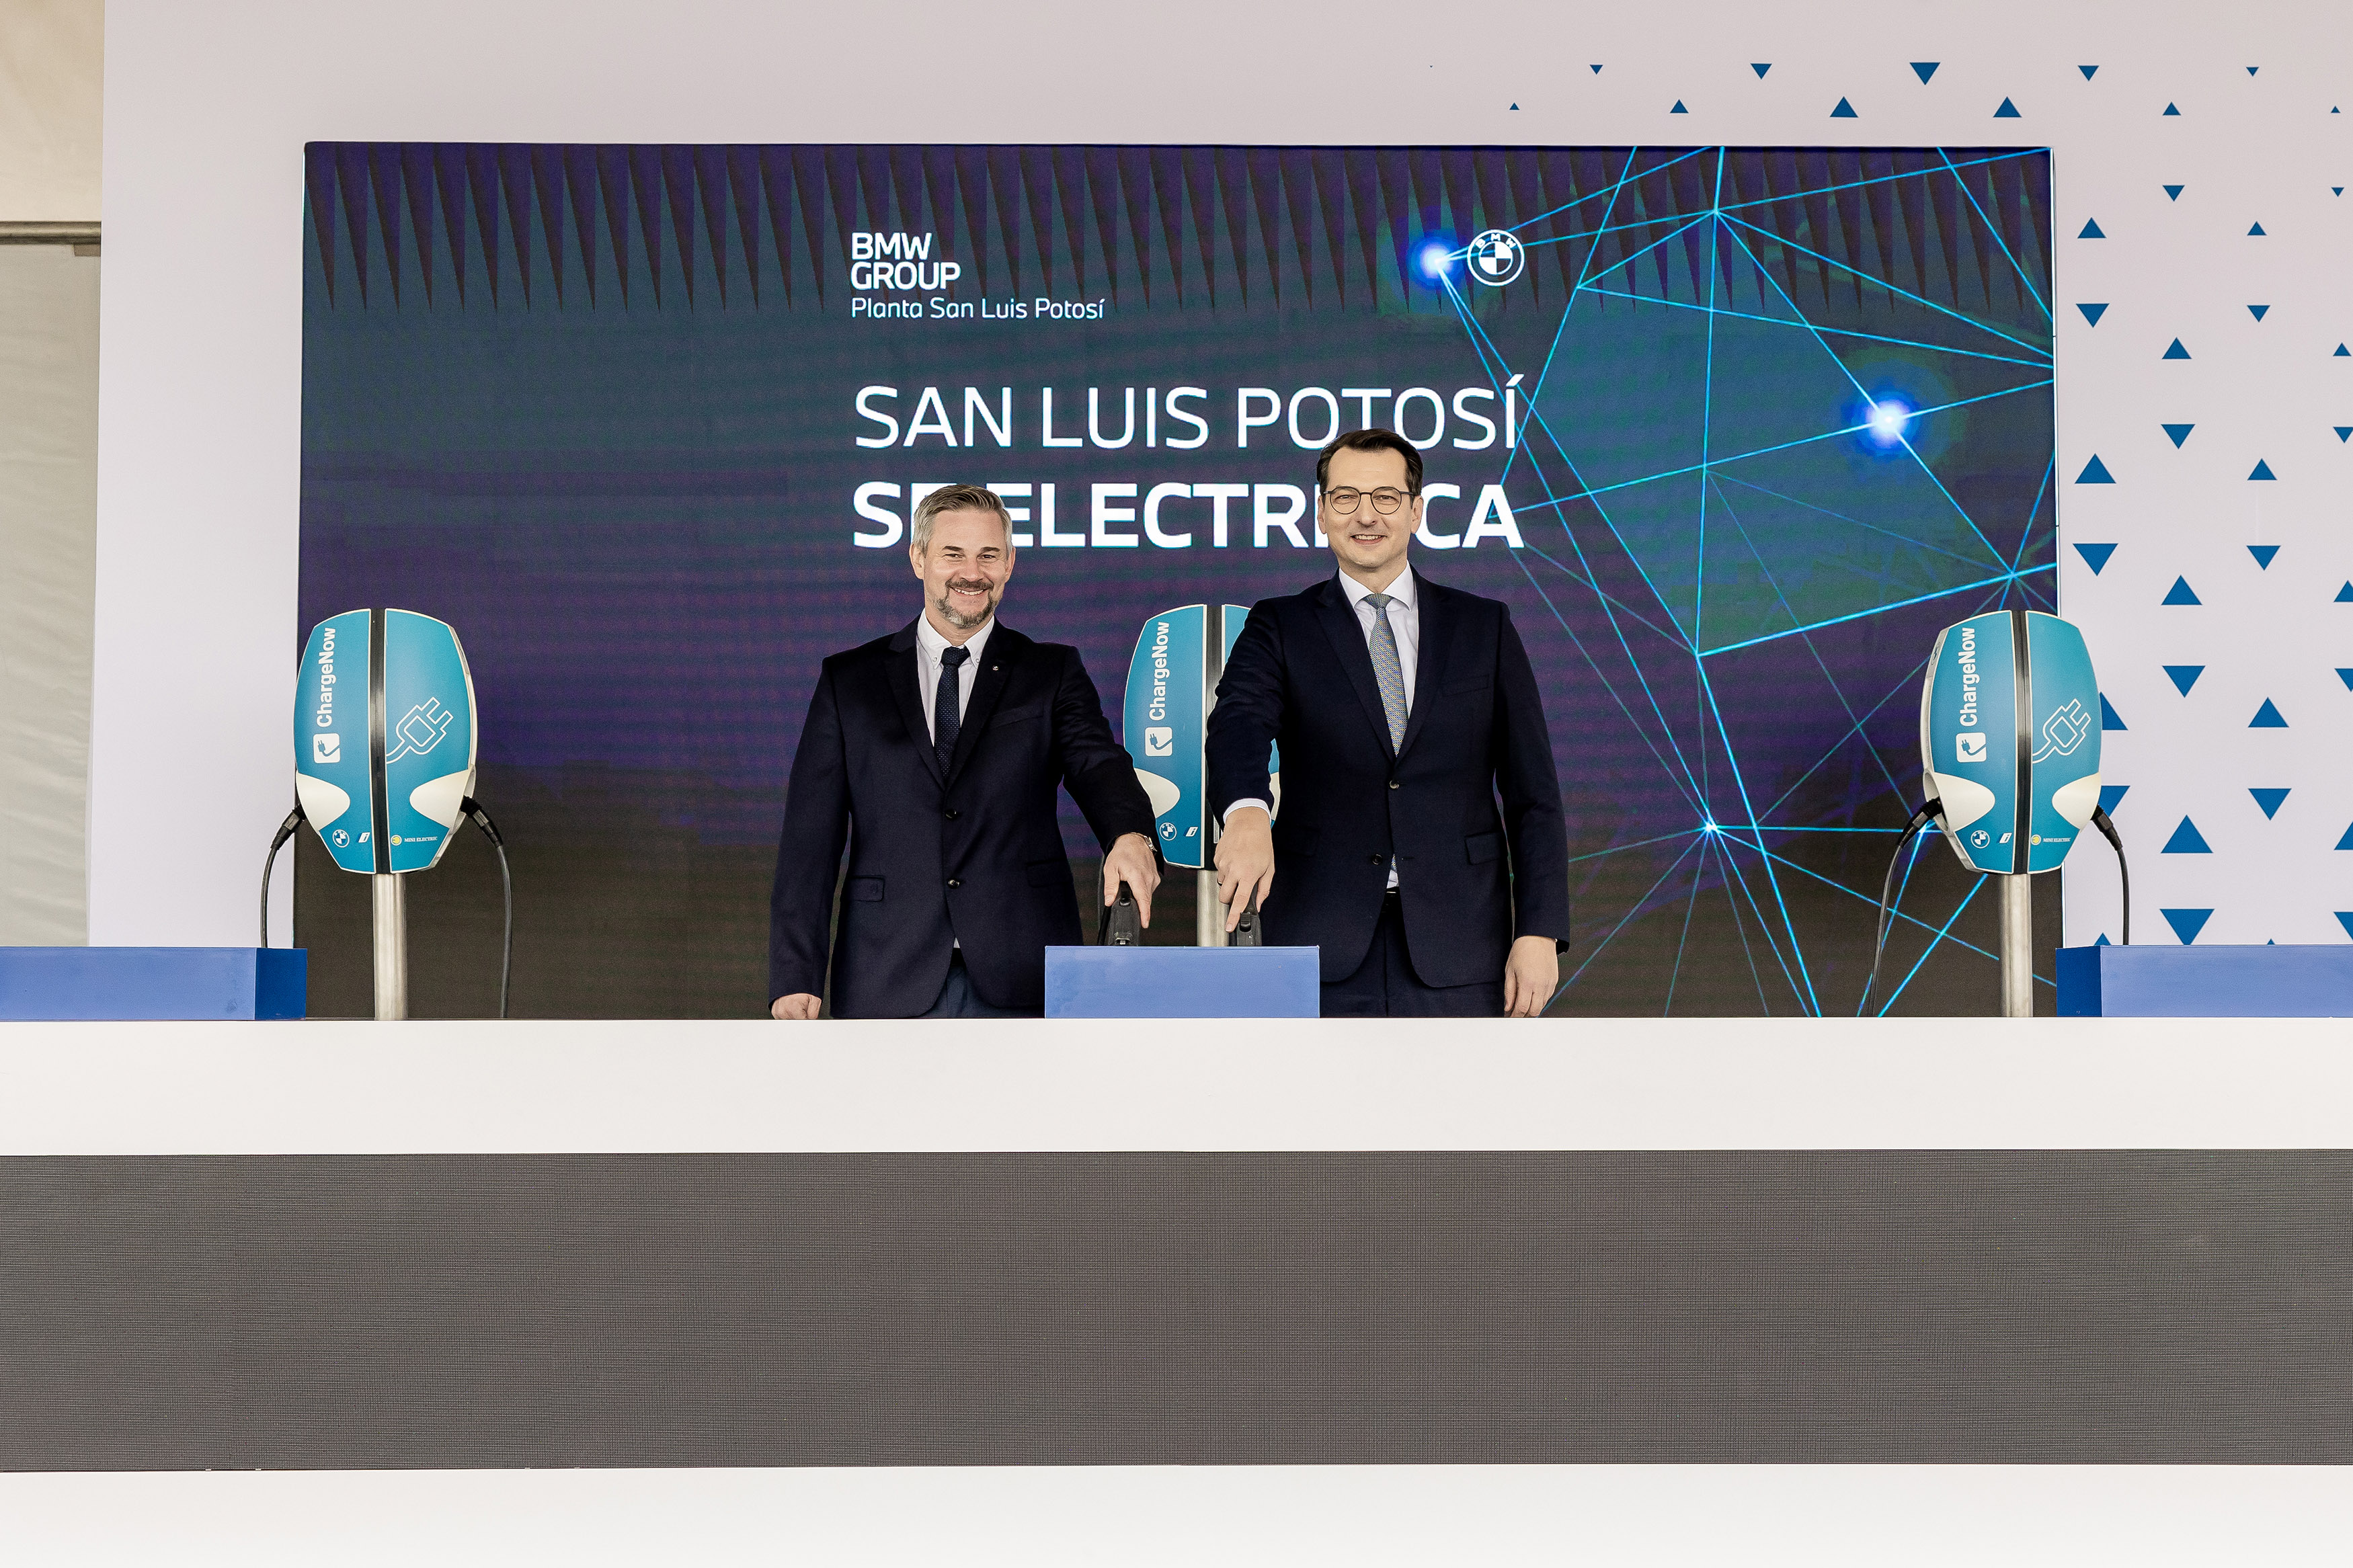 BMW Group steps up production of electric vehicles in global production network: NEUE KLASSE will also be built at Plant San Luis Potosí in Mexico